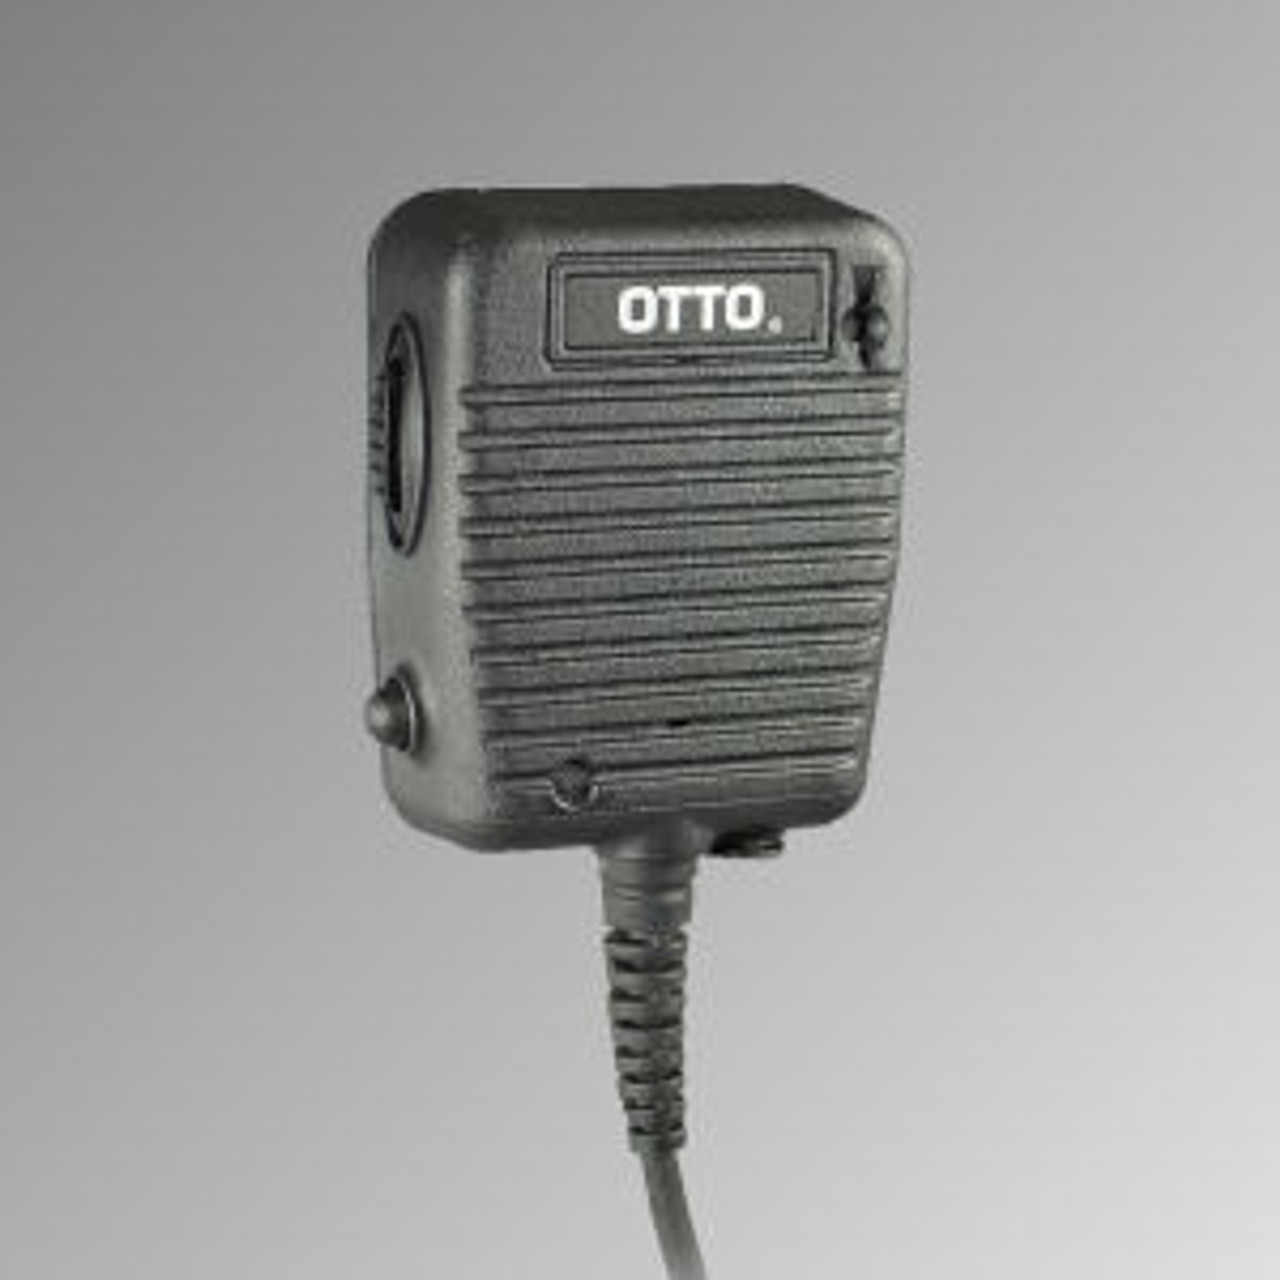 Otto Storm Mic For Harris P7270